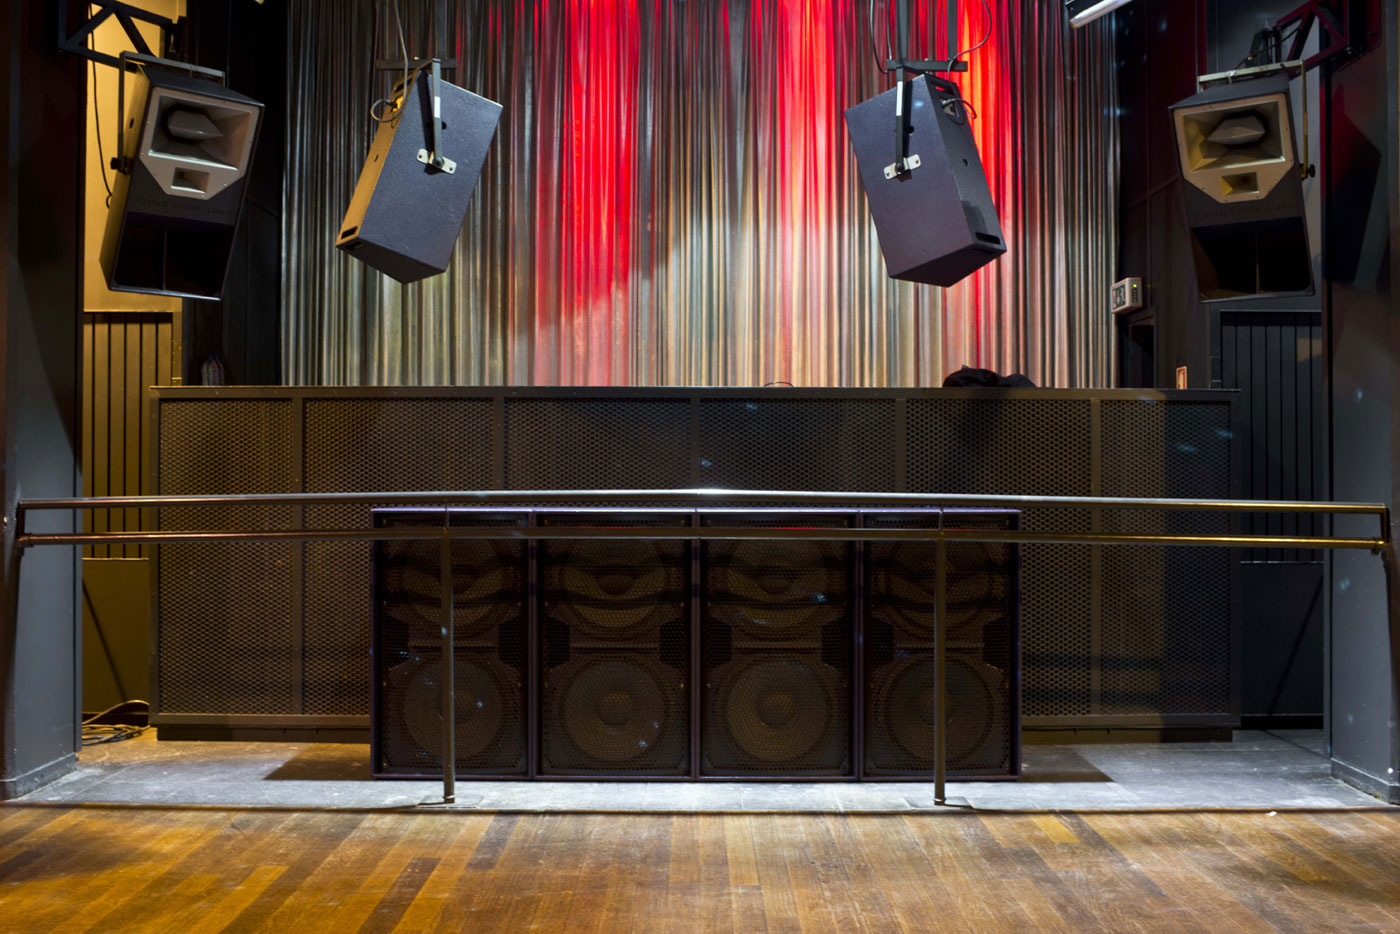 BR221 Bass and Res 2 speakers part of installation at Lux Club - Portugal